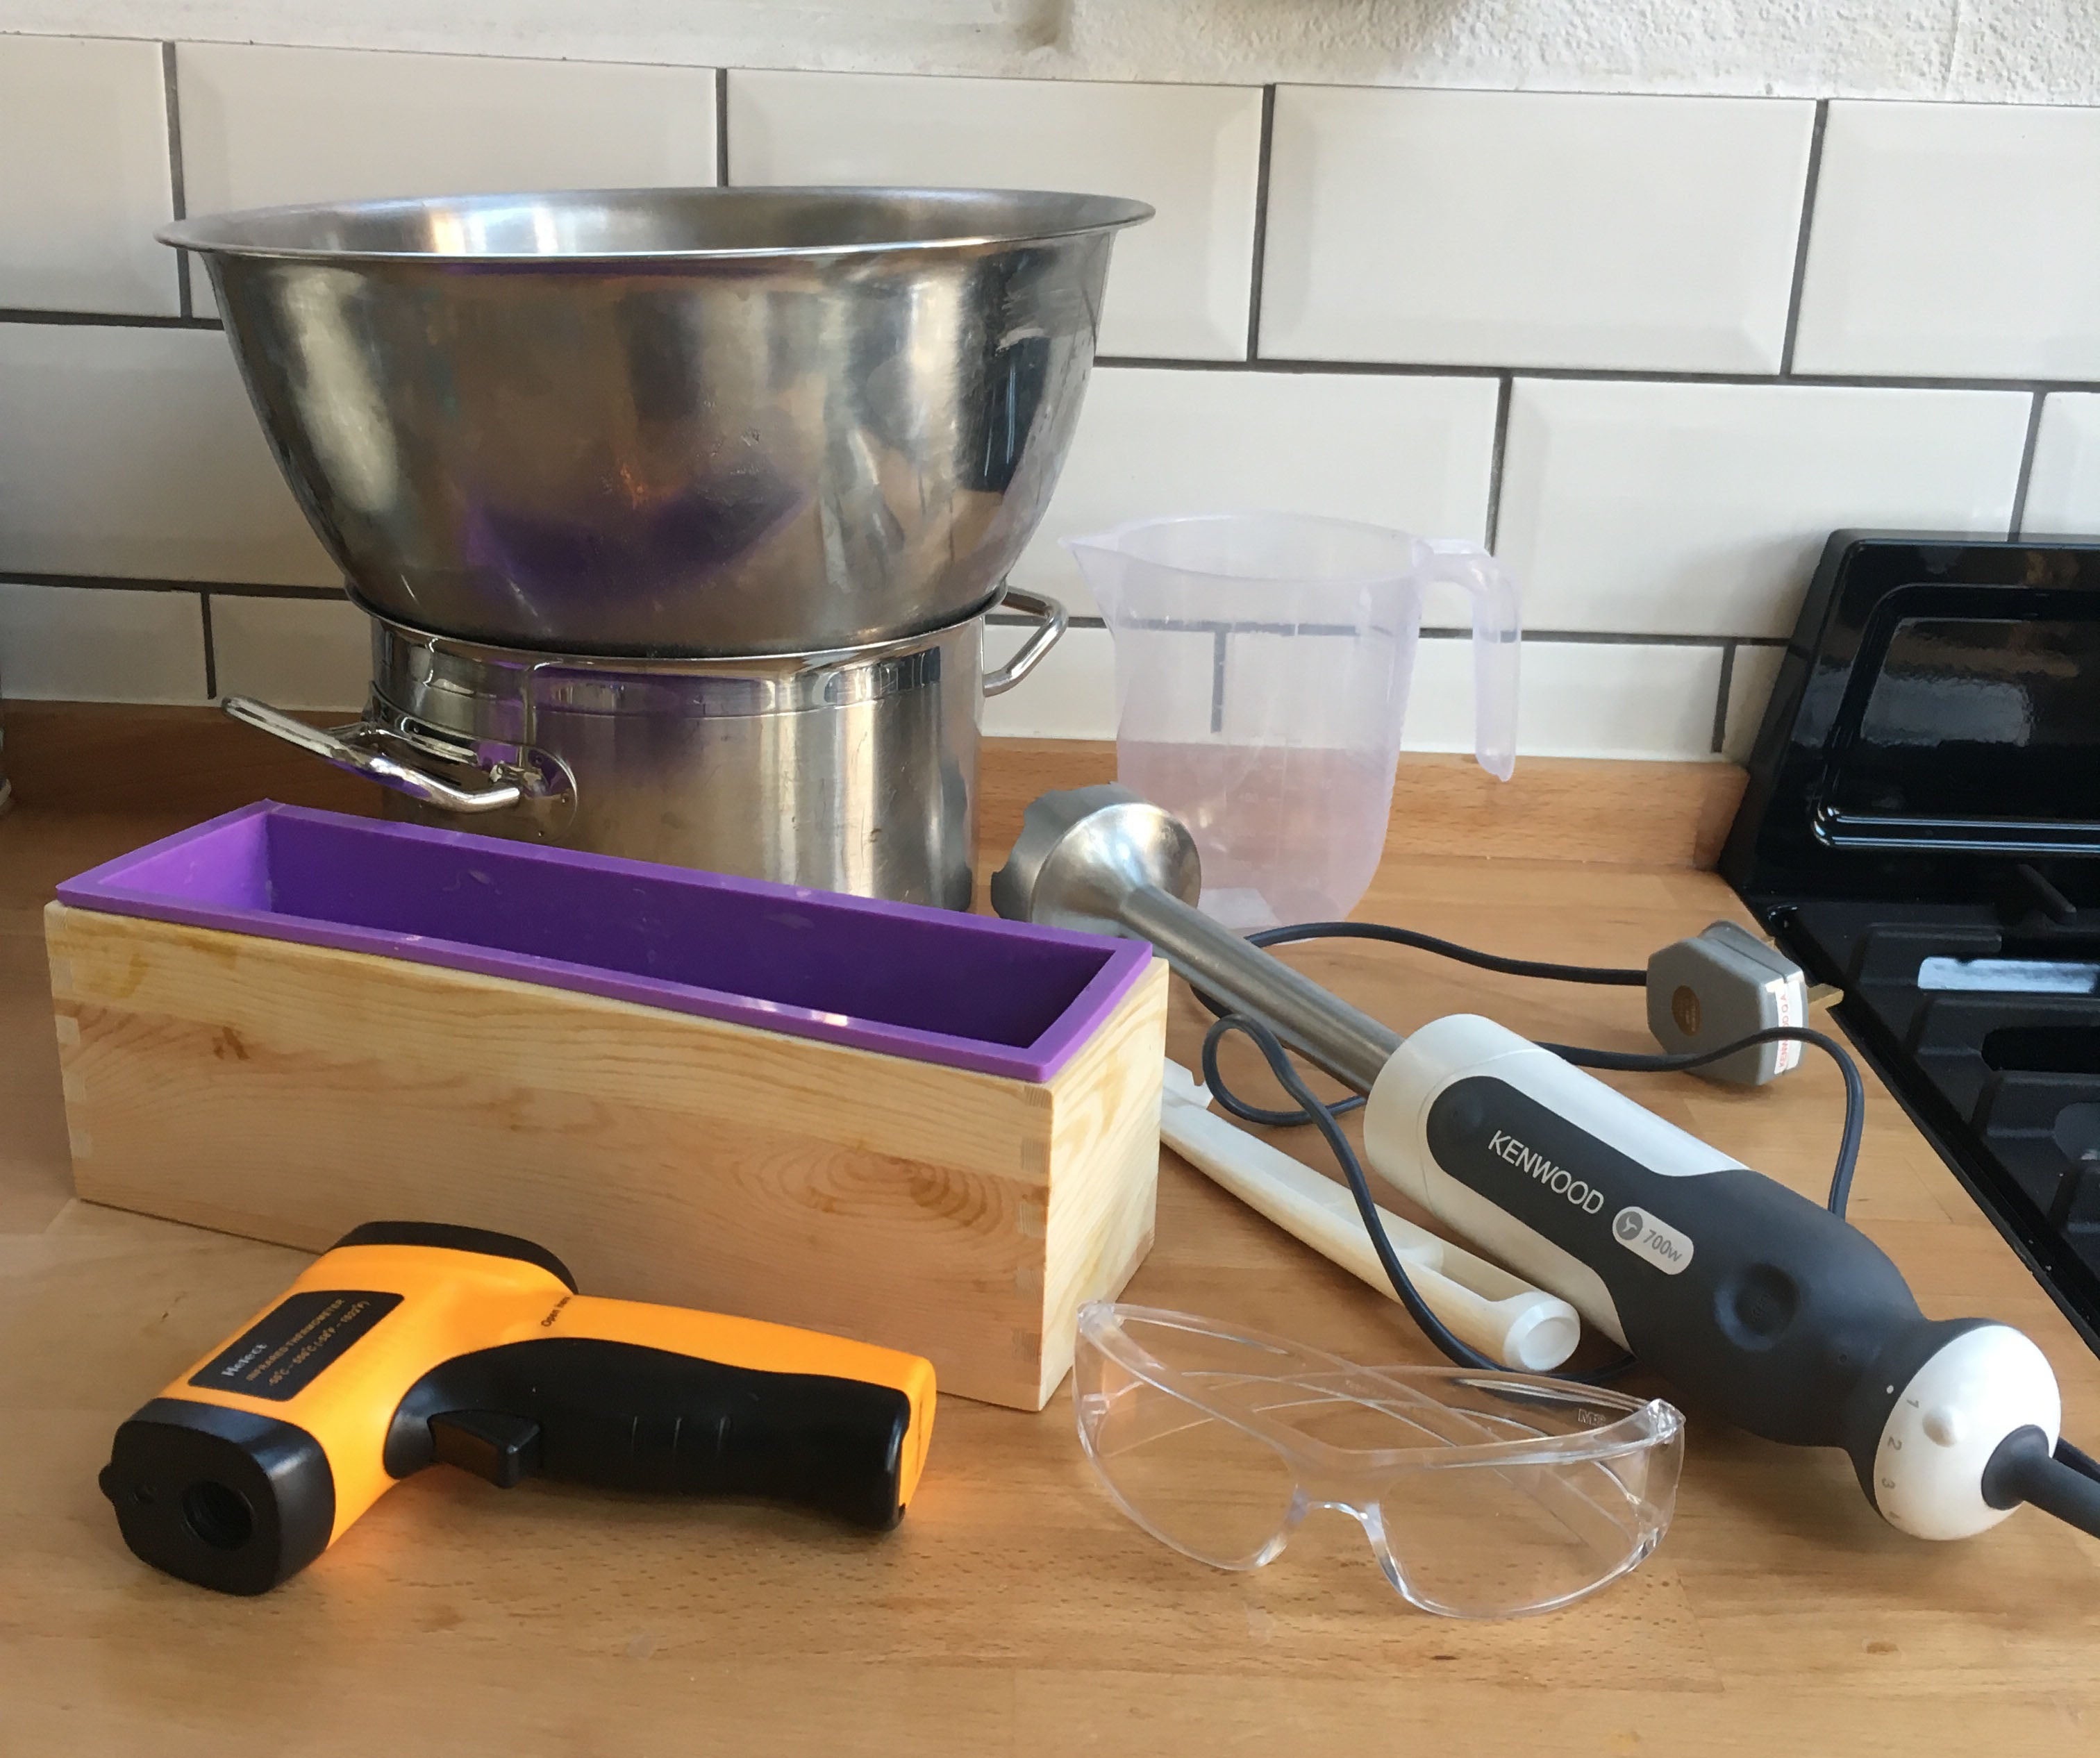 List of Equipment You Need to Make Soap at Home